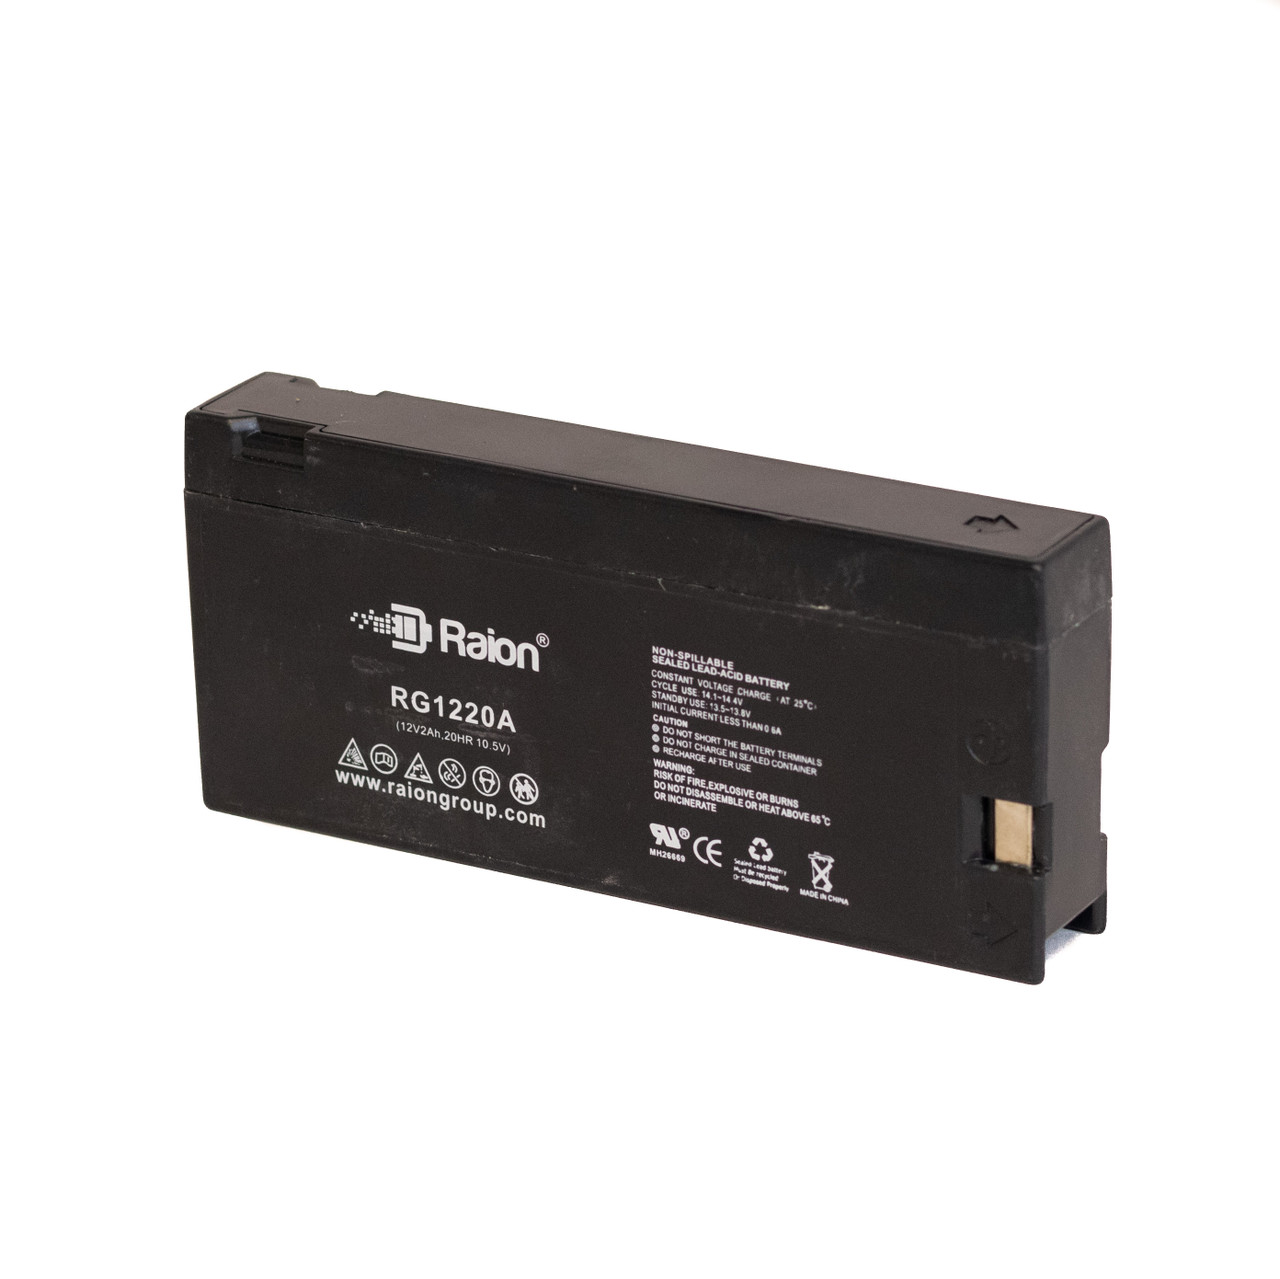 Raion Power RG1220A Replacement Battery for JC Penney 890-1902